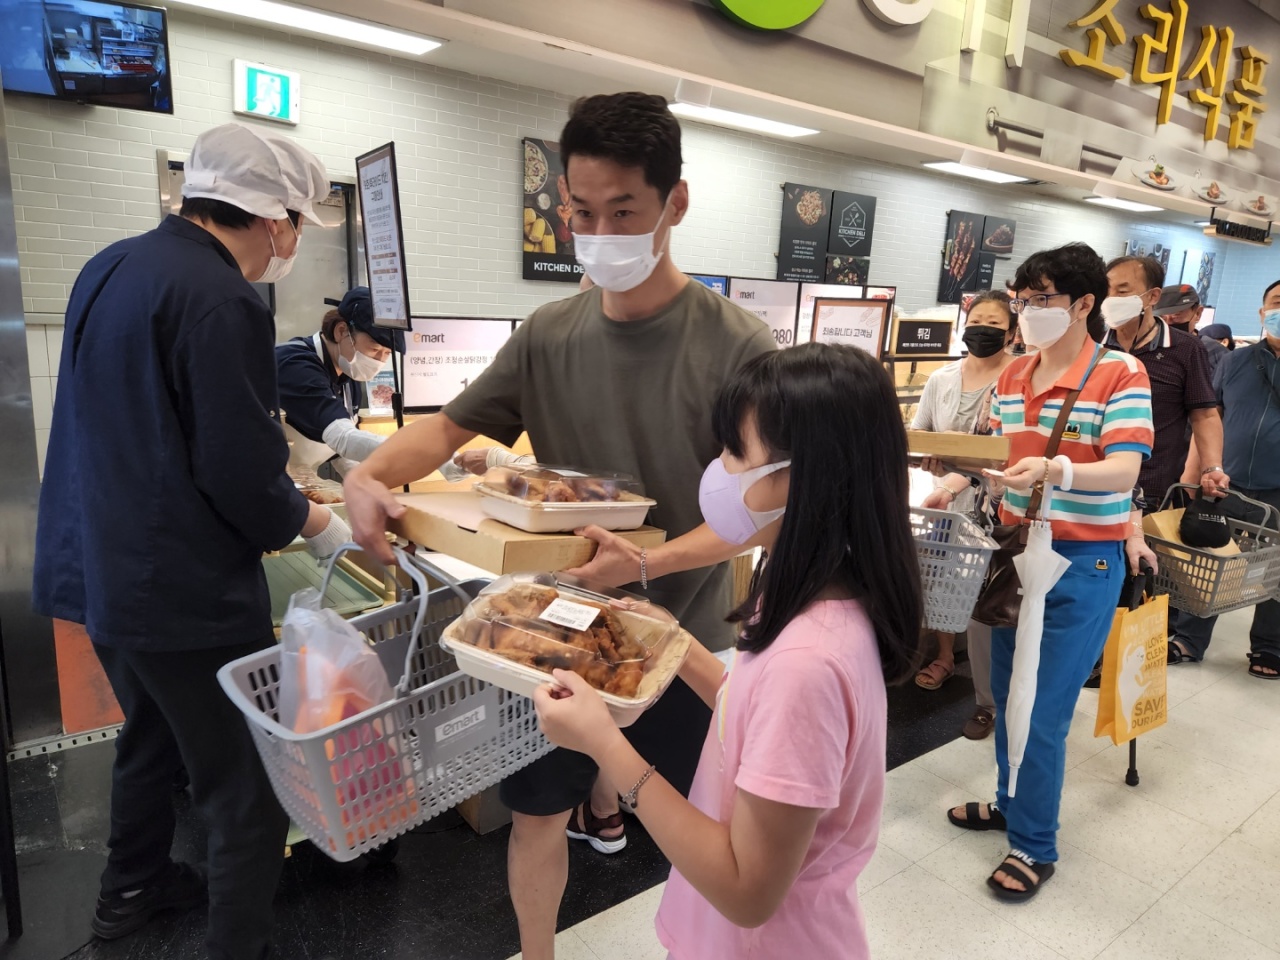 People receive buckets of fried chicken at a deli counter on the basement floor of an E-mart in Eunpyeong-gu, northern Seoul, on Tuesday. (Choi Jae-hee / The Korea Herald)